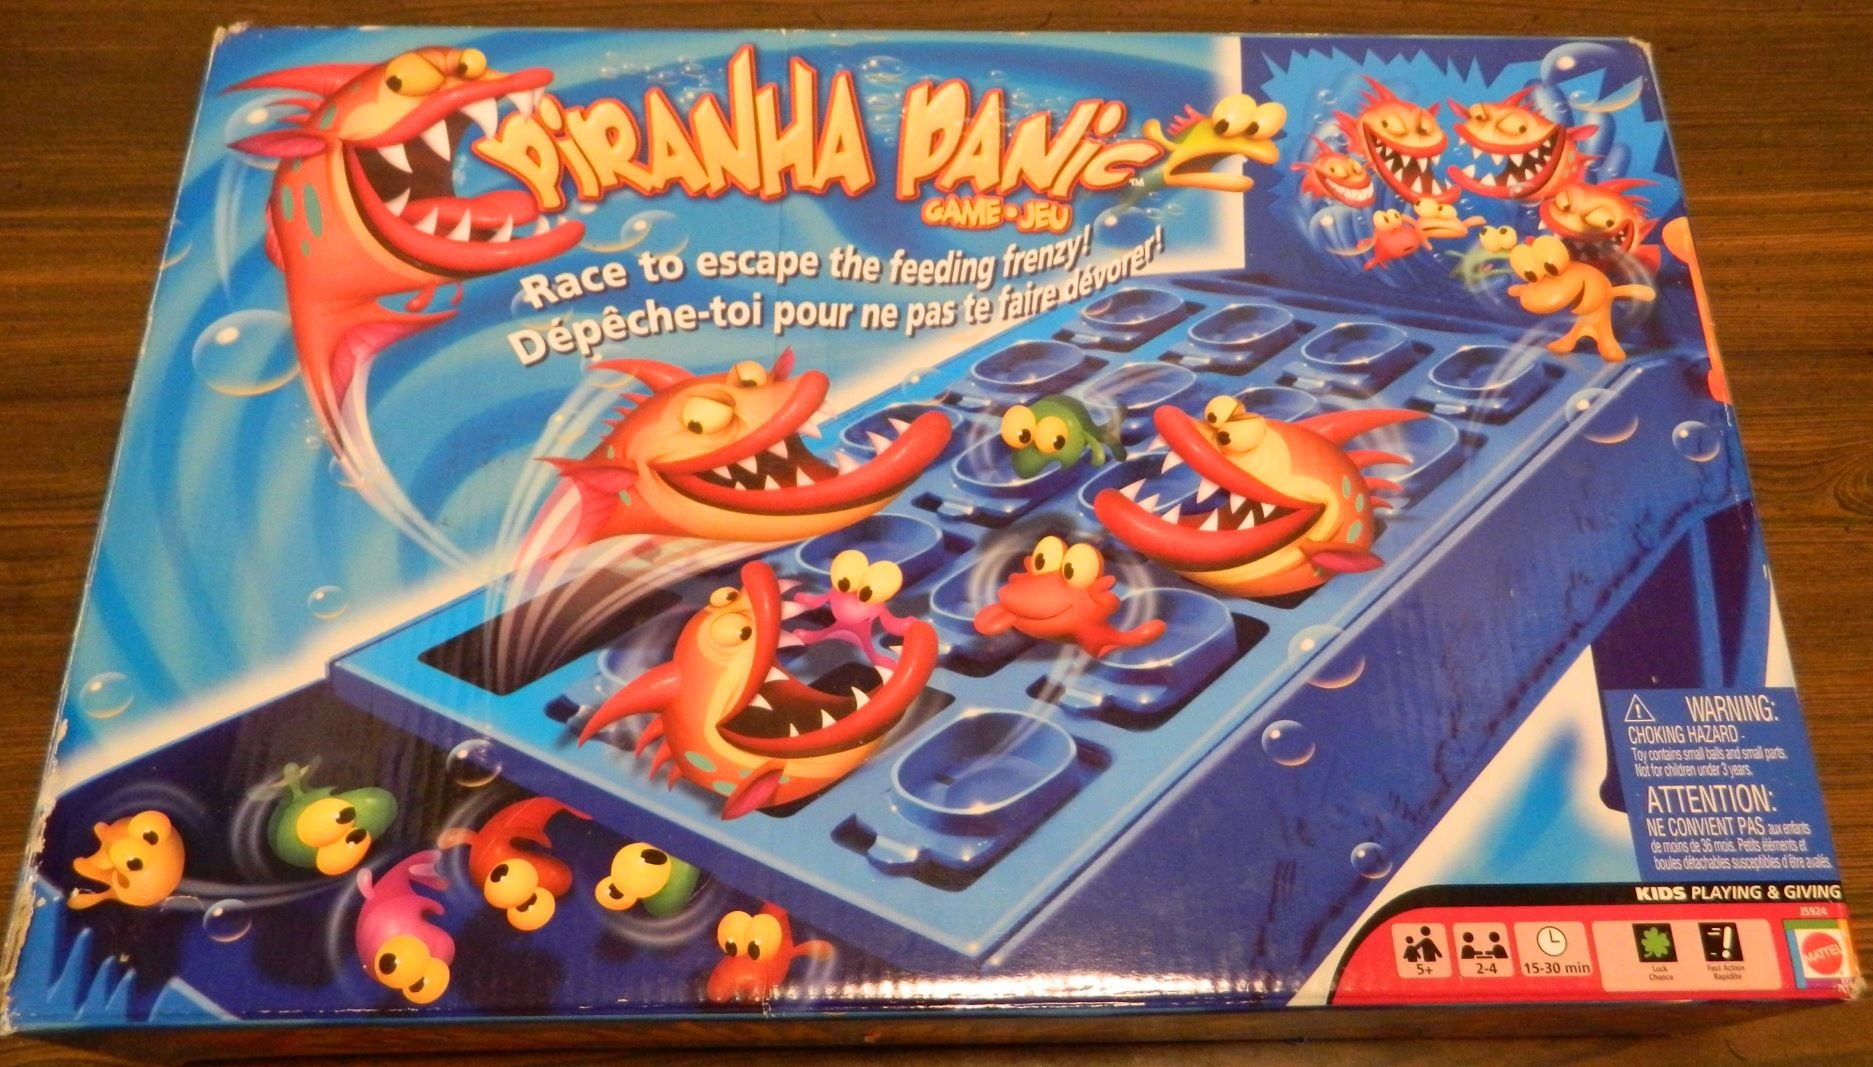 Piranha Panic Board Game Review and Rules